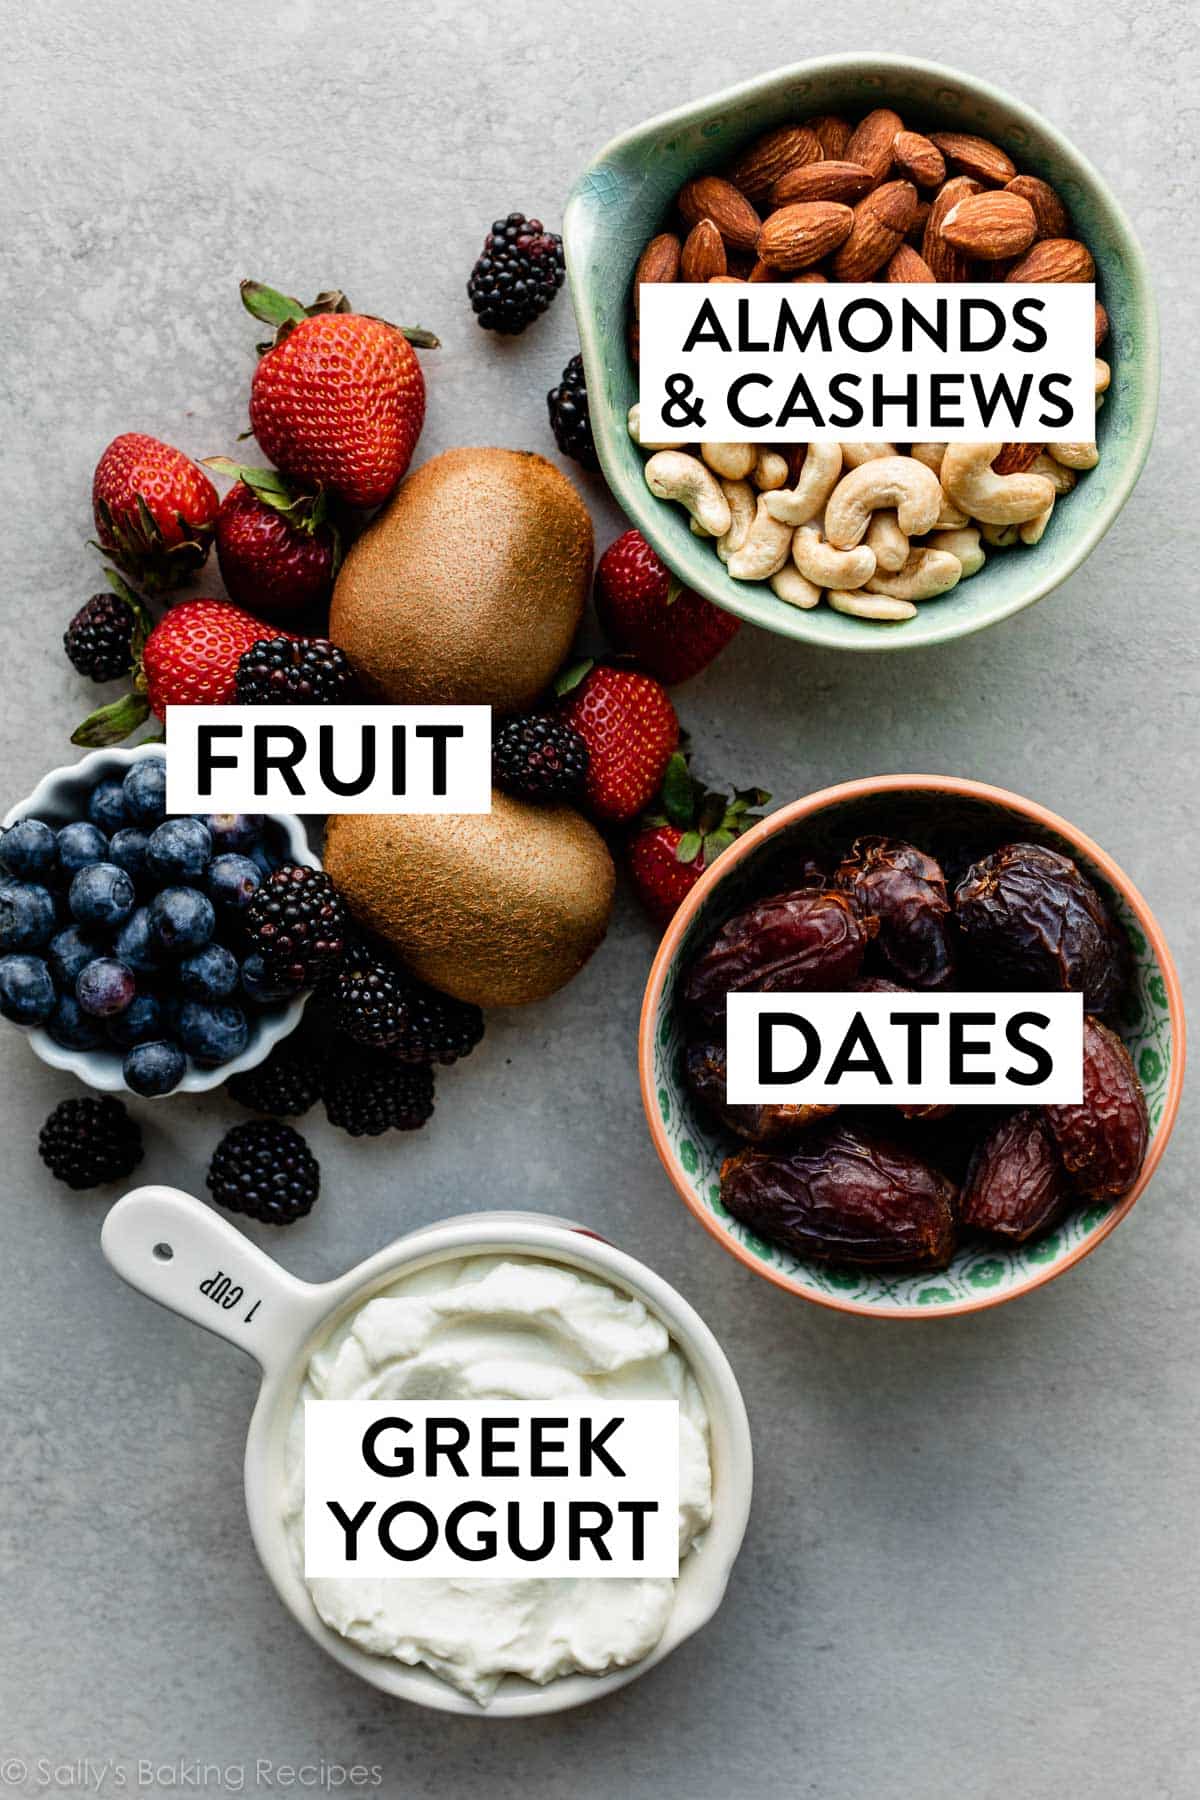 ingredients in bowls including almonds and cashews, dates, Greek yogurt, and fresh fruit.